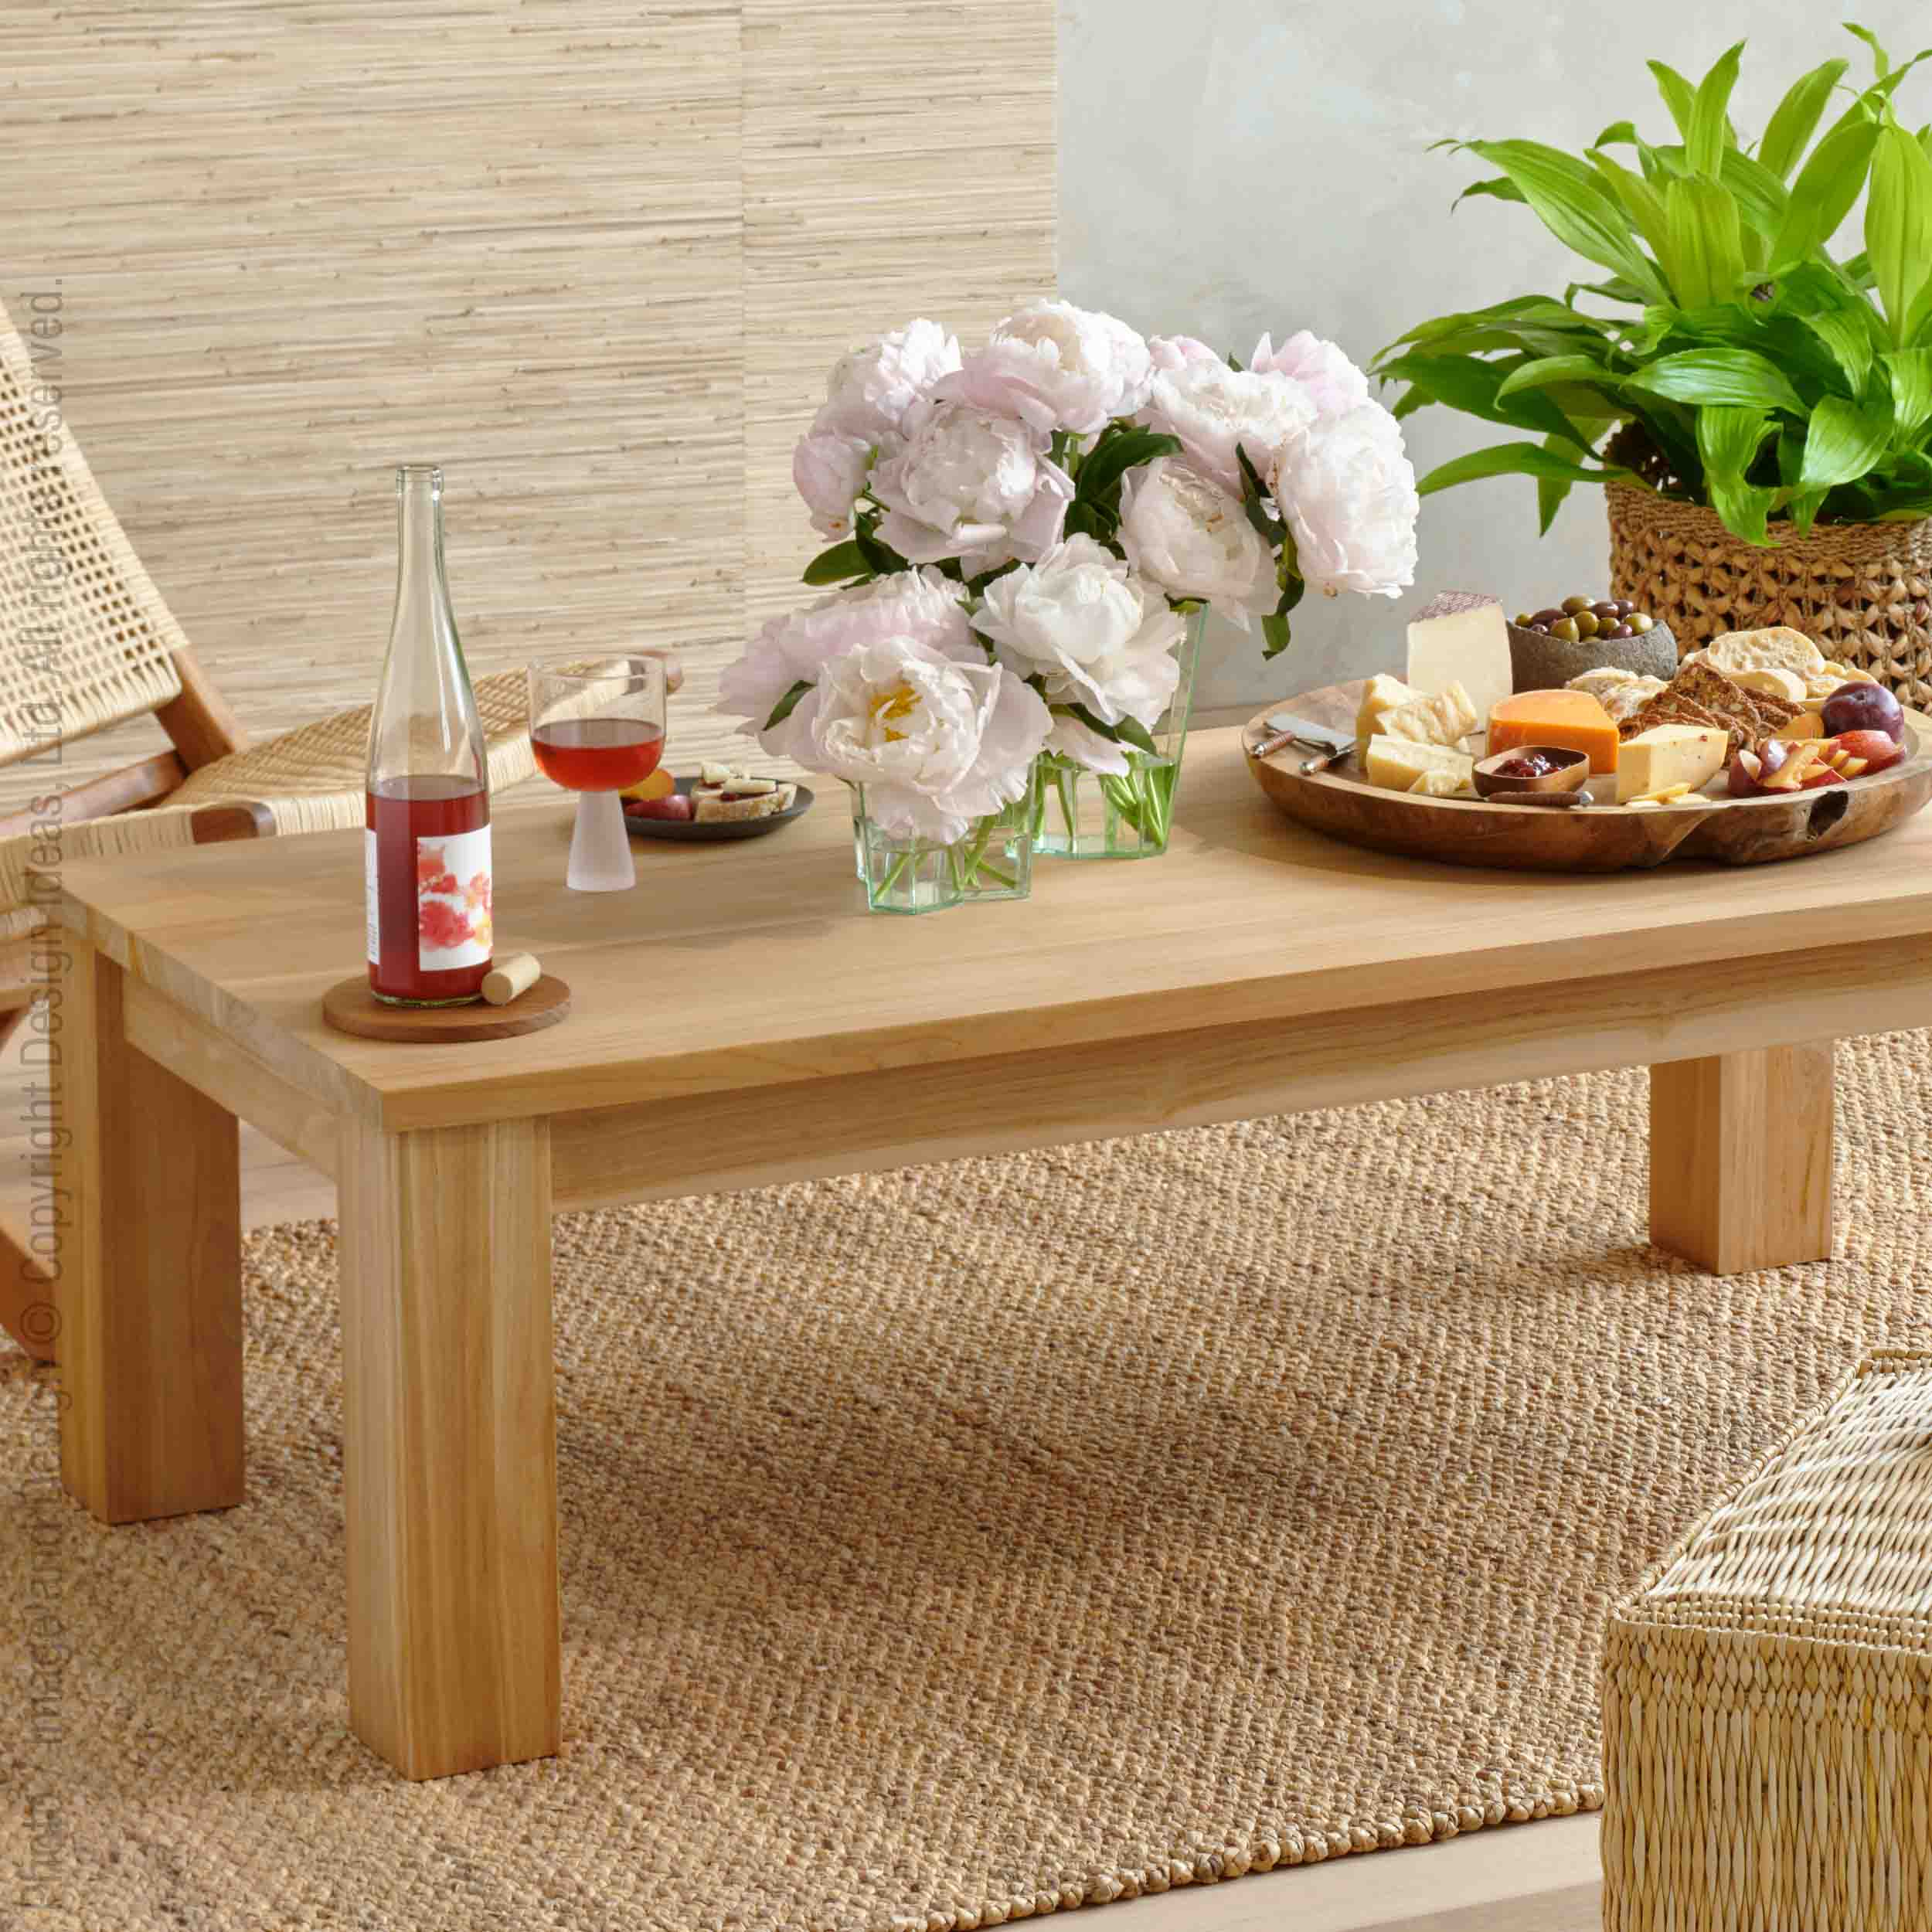 Takara™ Teak Rectanglar Coffee Table | Image 2 | From the Takara Collection | Elegantly made with natural teak for long lasting use | Available in natural color | texxture home